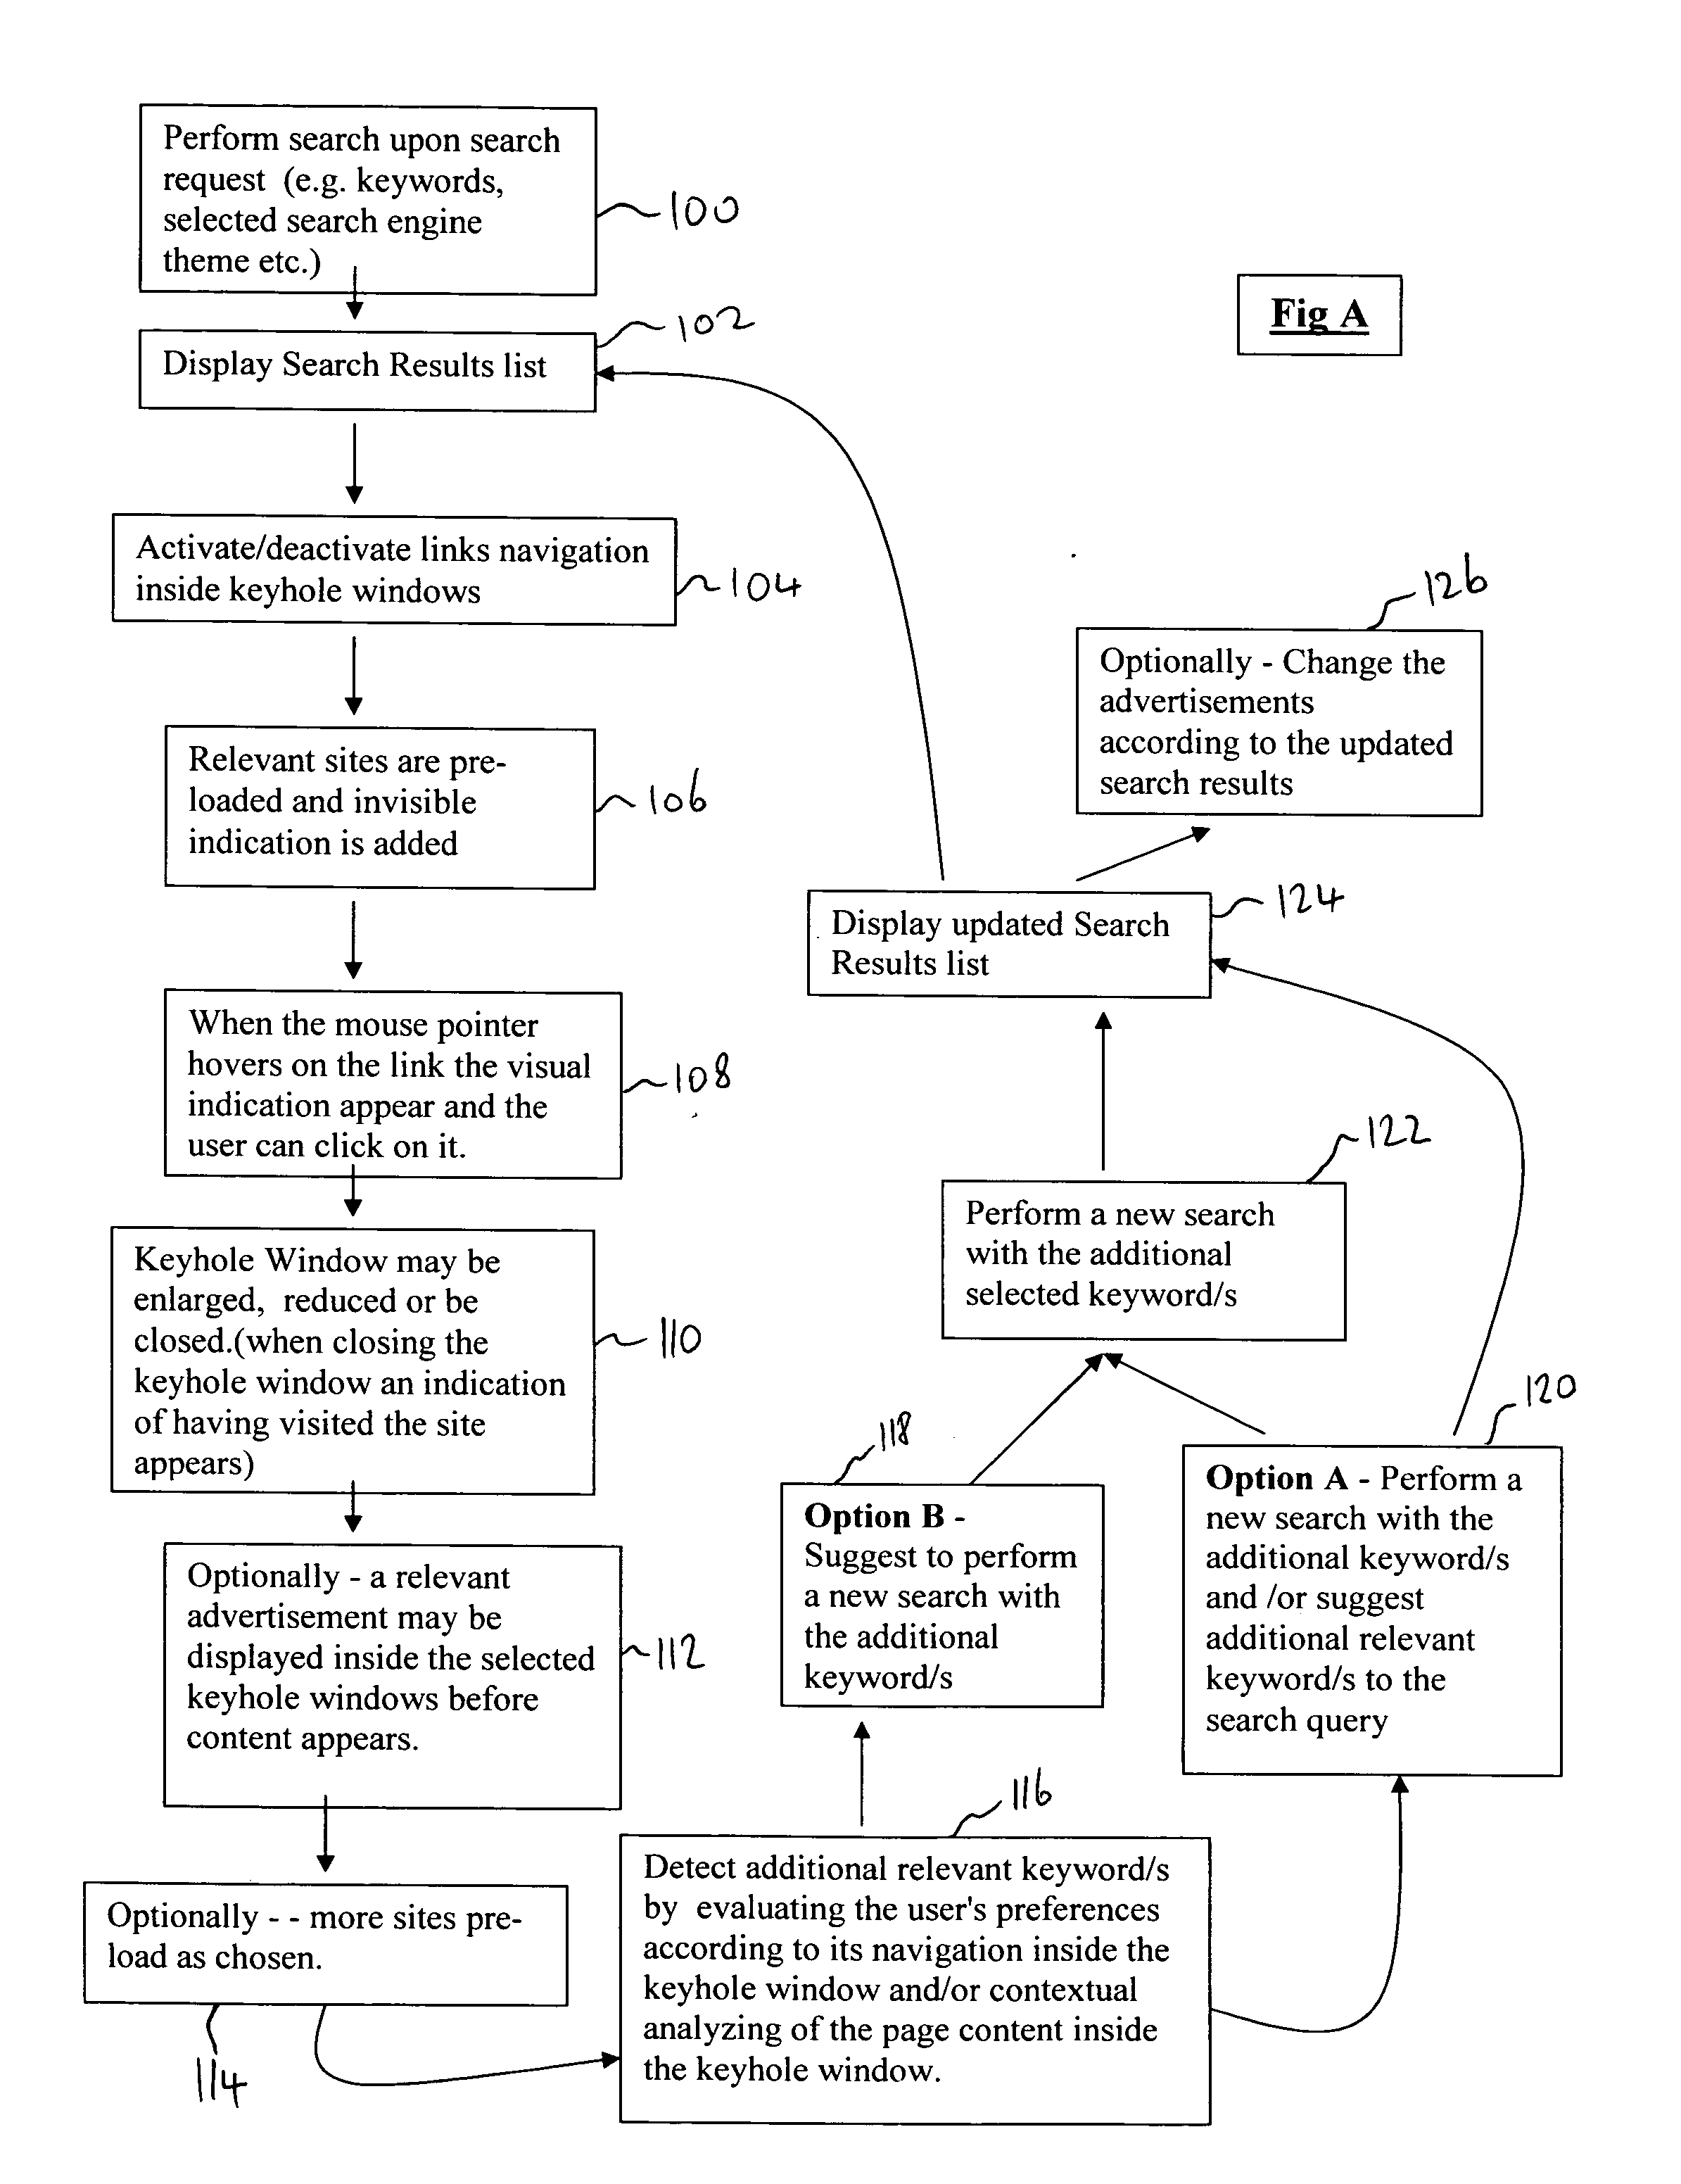 Method and systems for real-time active refinement of search results